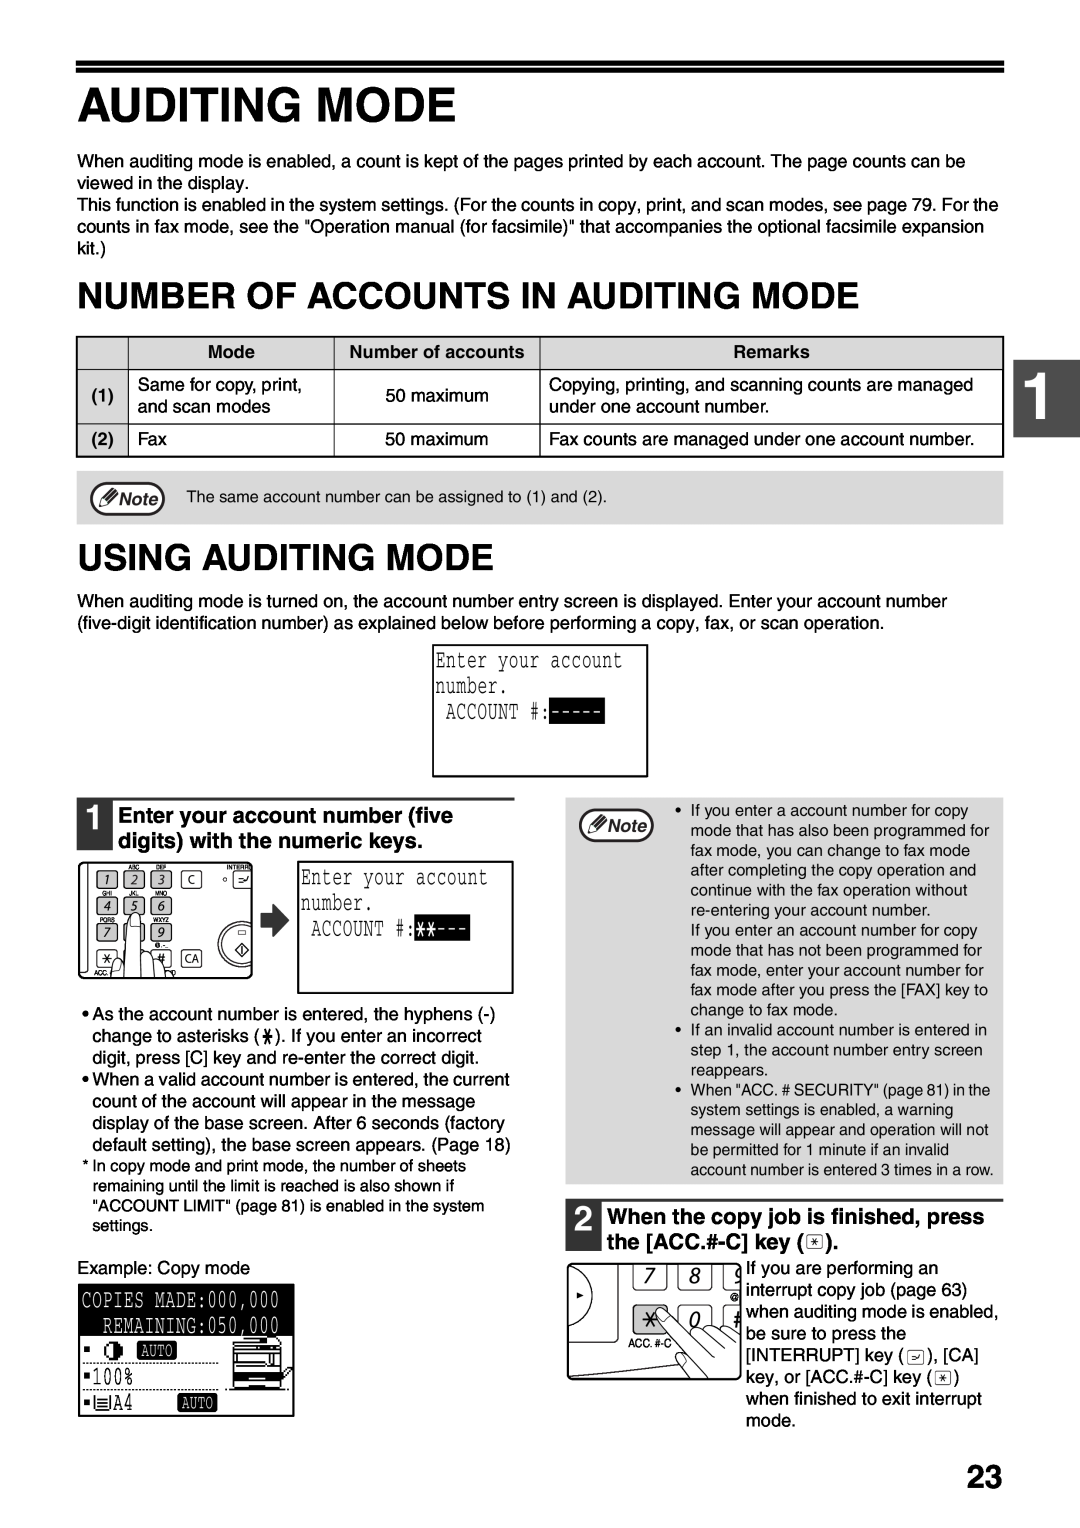 Sharp MX-M200D Number Of Accounts In Auditing Mode, Using Auditing Mode, ˚˚˚˚˚, Enter your account number, Auto 